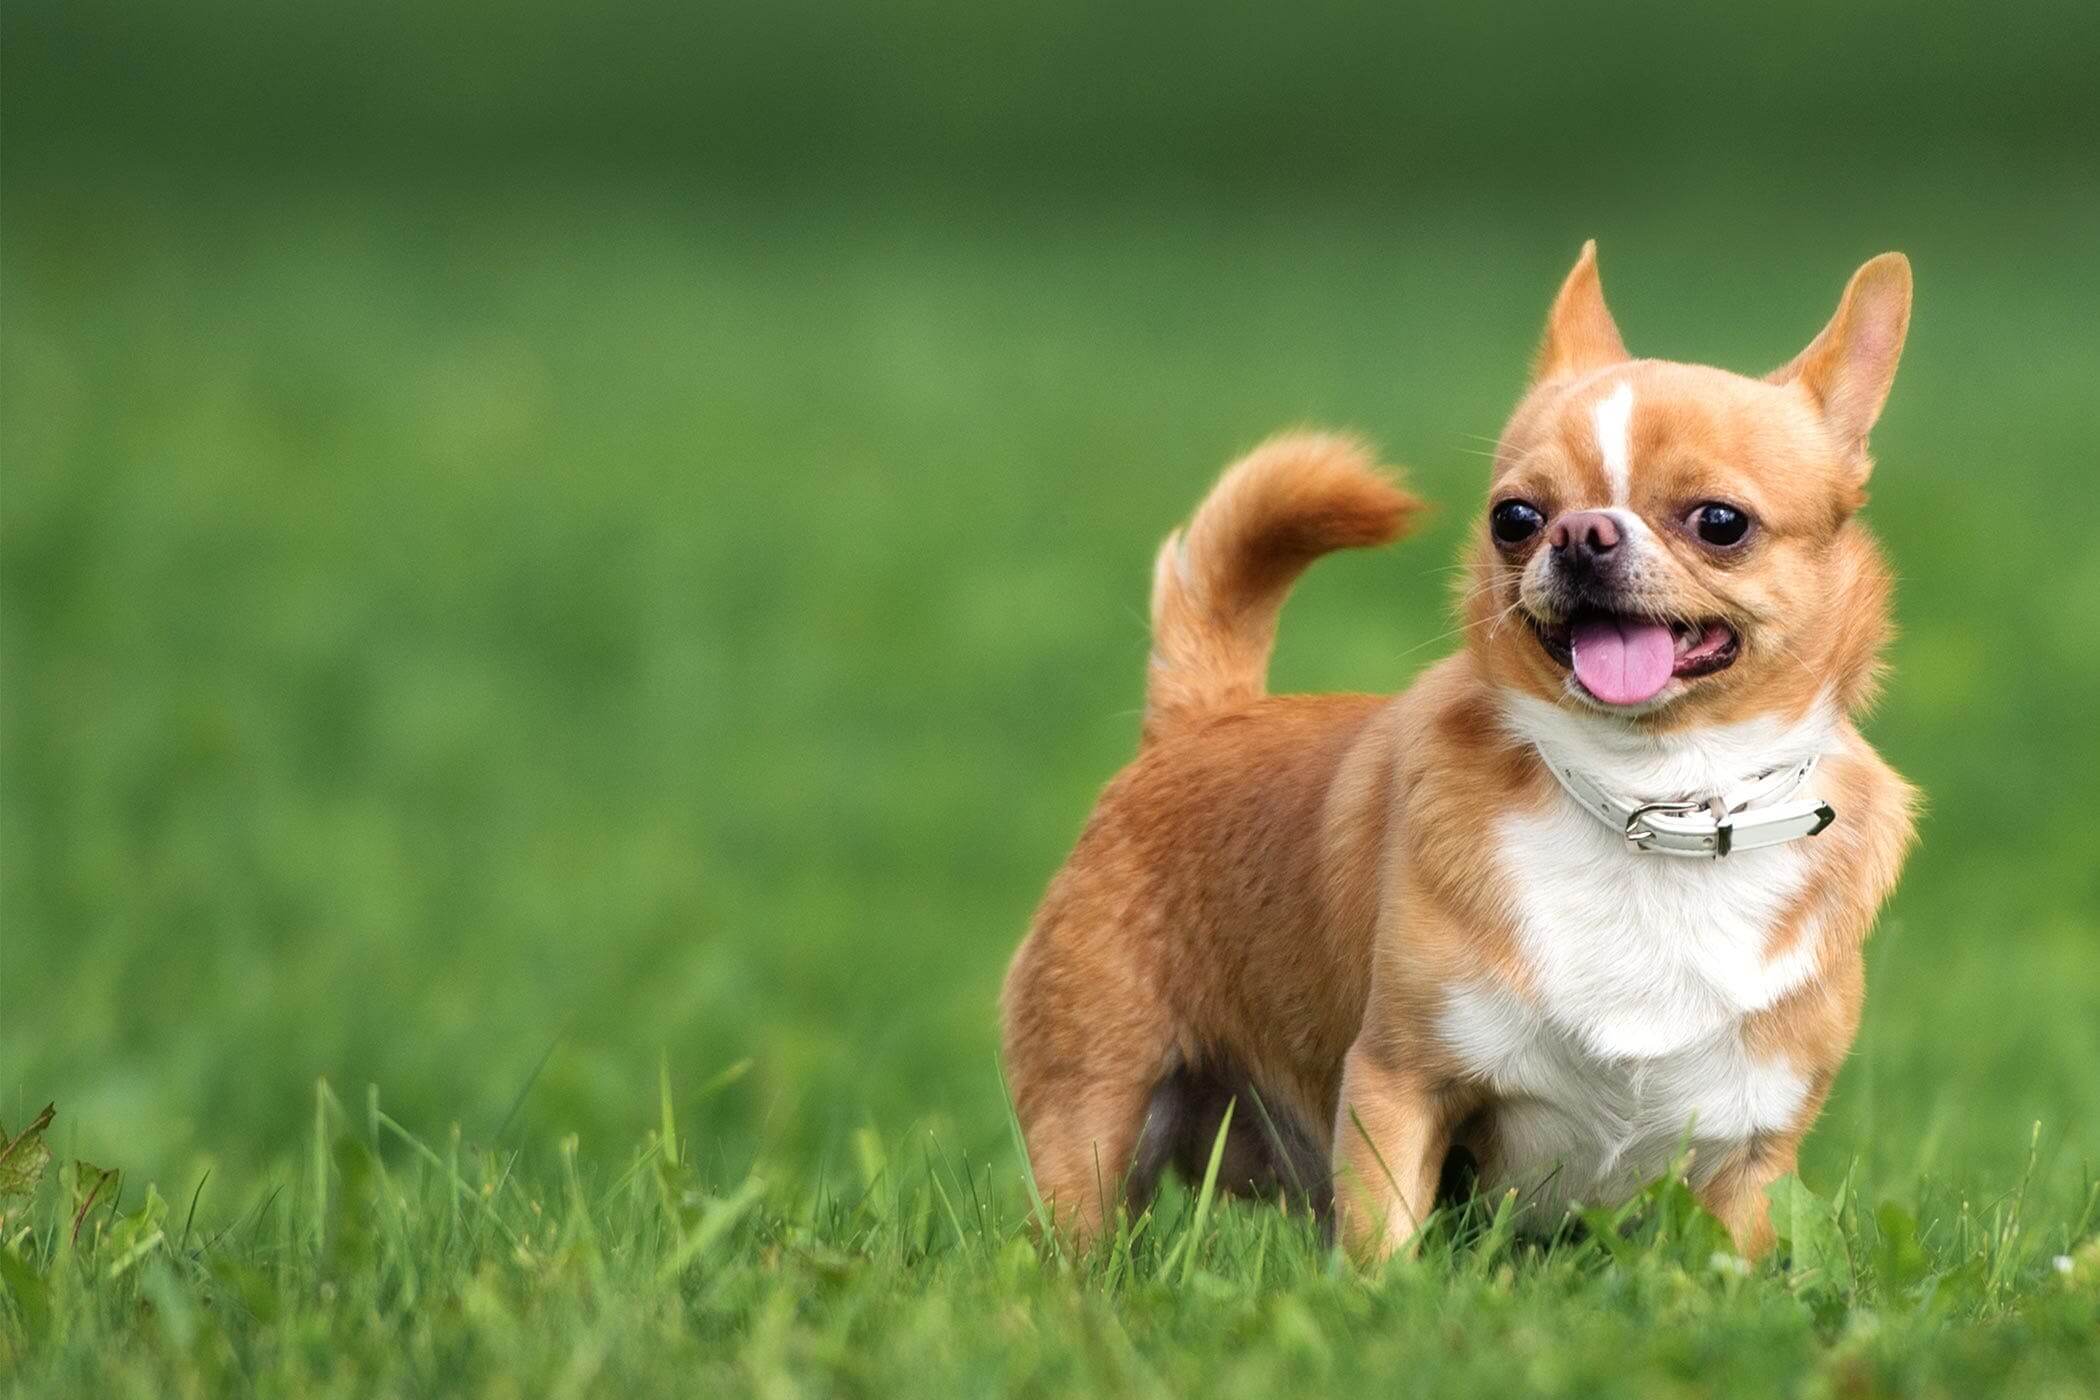 Chihuahua: tiniest dog breed in the world